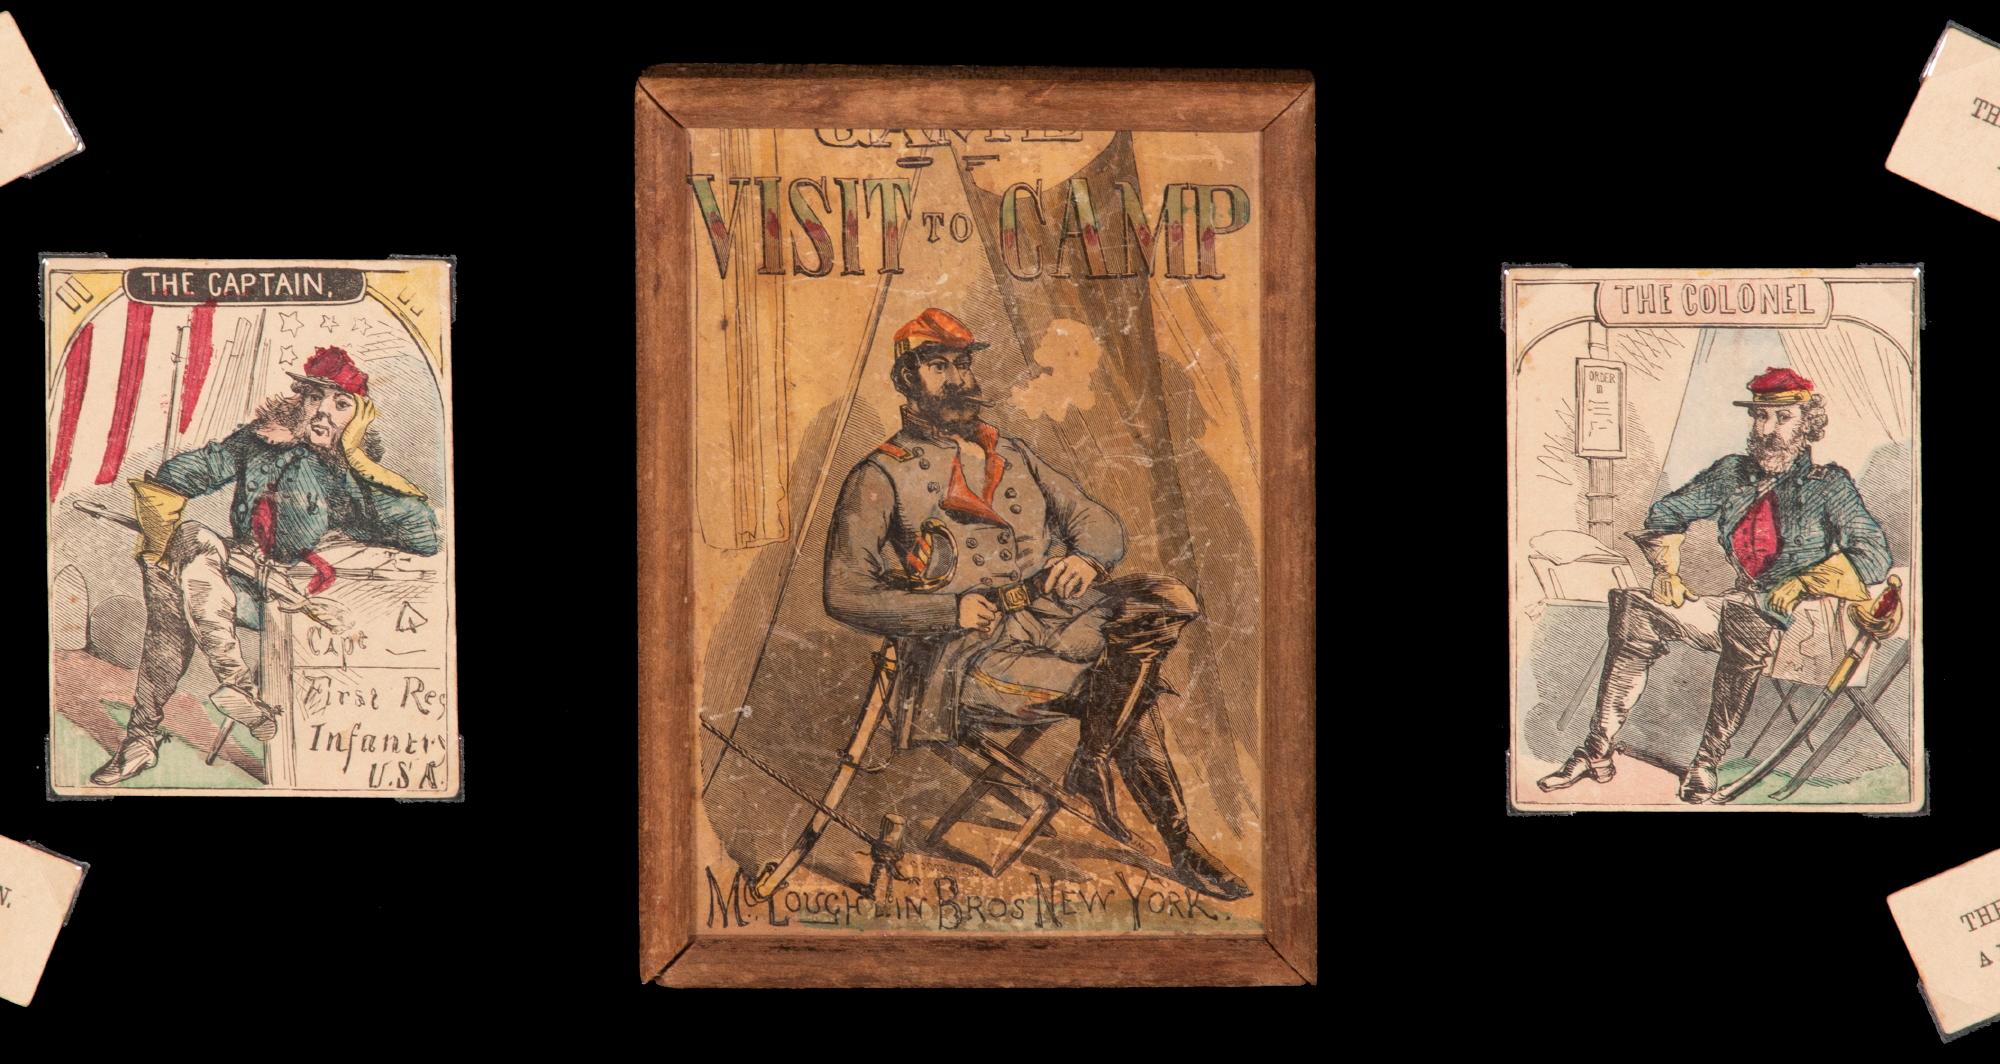 “Visit To Camp,” an extraordinarily rare card game by mclaughlin brothers of new york, circa 1871.

This extremely rare card game, designed with Civil War context, was made by McLoughlin Brothers in New York City. The set includes 12 (complete)